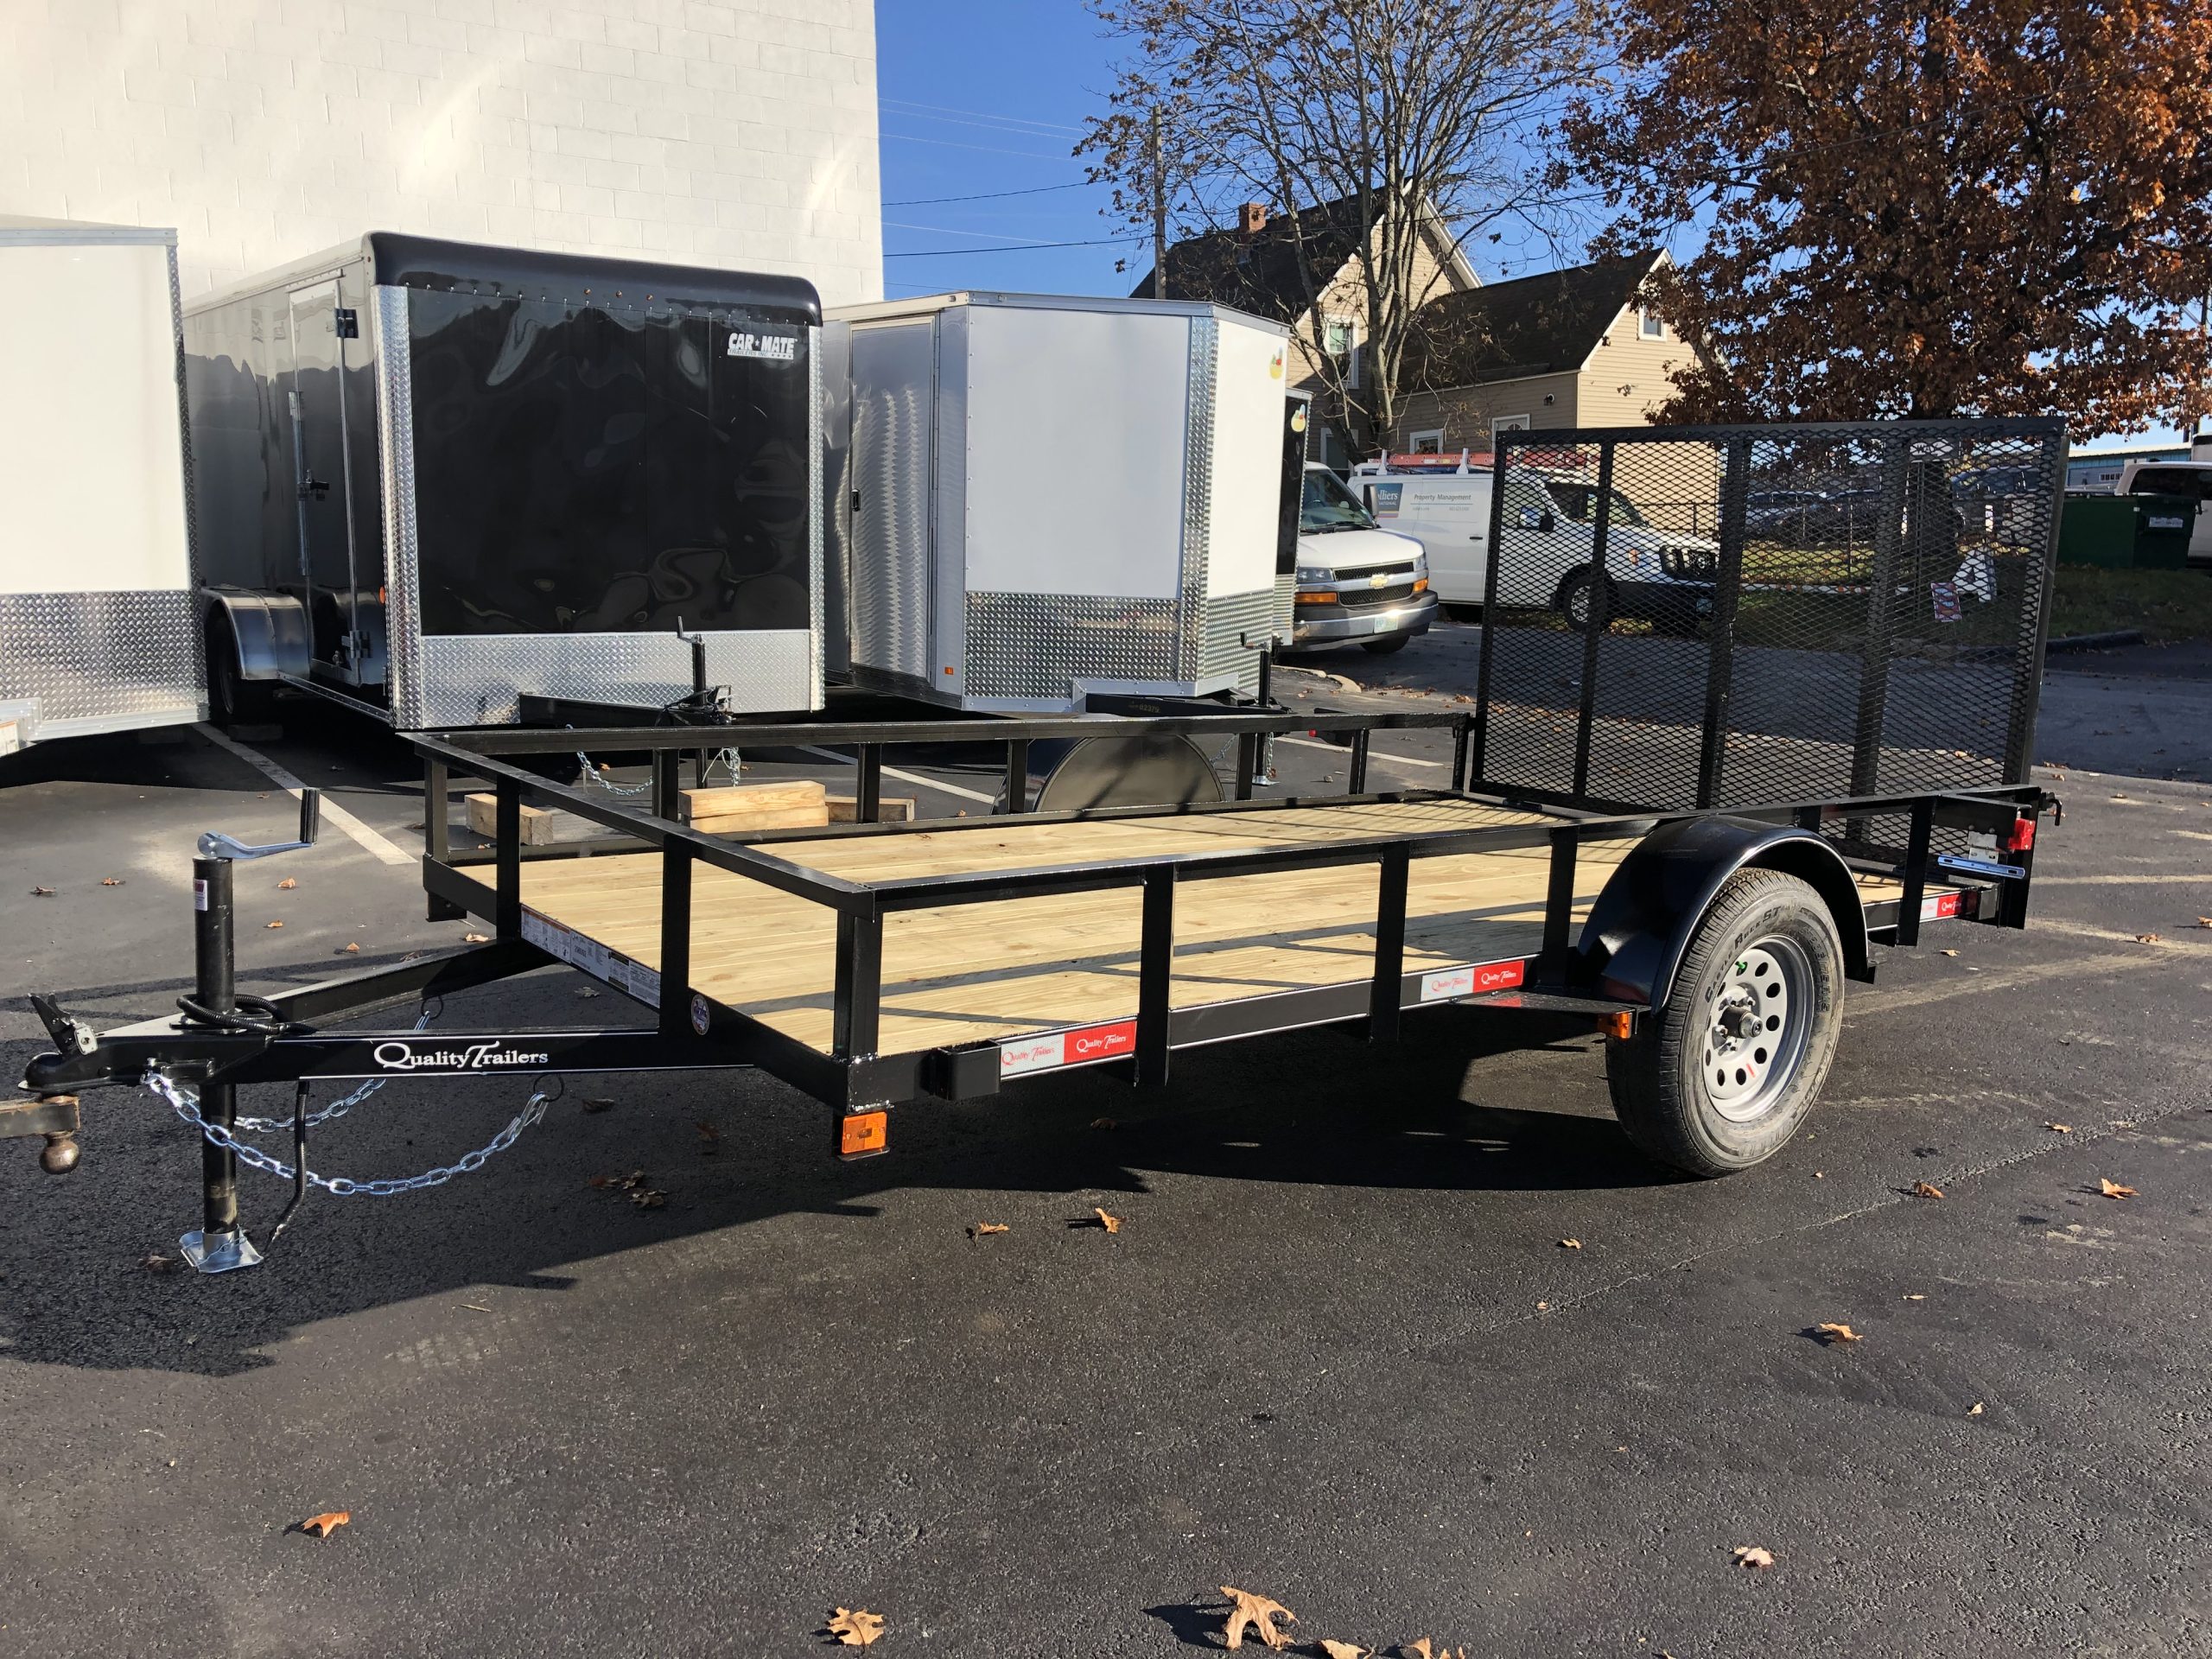 Top Strategies for Finding Dump Trailers for Sale in Tucson